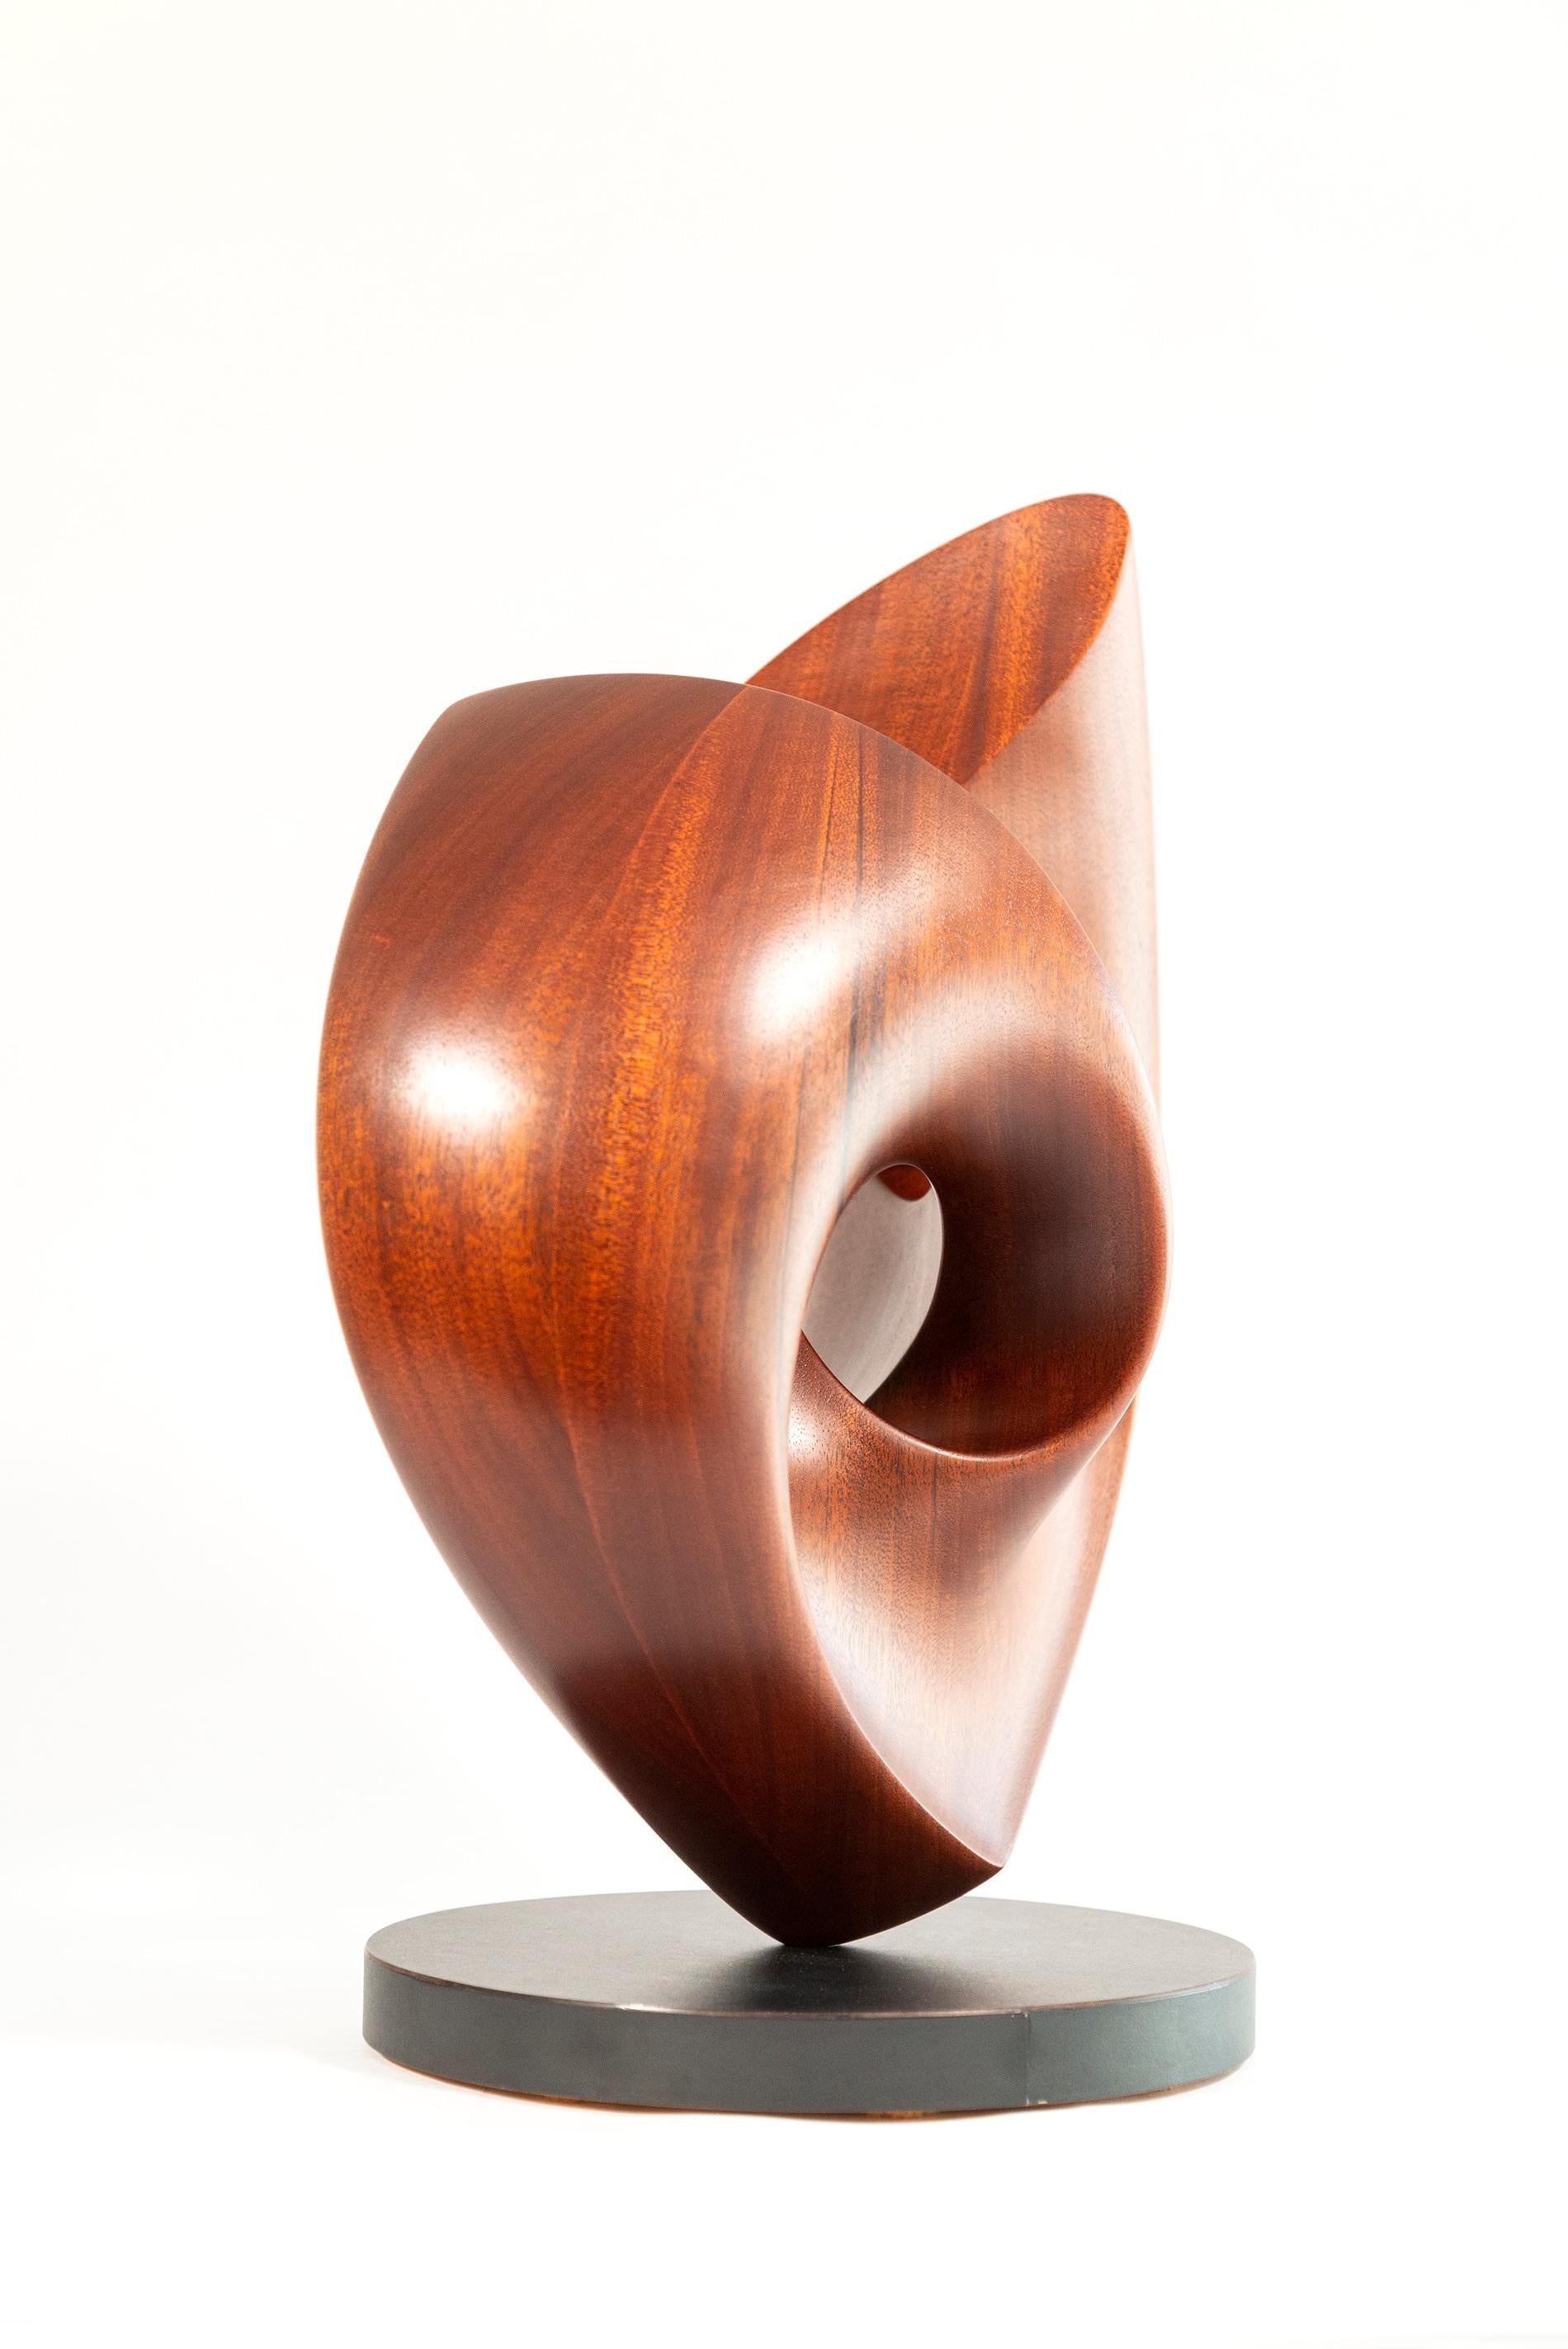 The graceful curves of this contemporary solid mahogany sculpture by David Chamberlain appear to emulate the image of a heart. Hand carved from one piece of this rare wood; the abstract form is one continuous loop. The naturally rich grain is highly